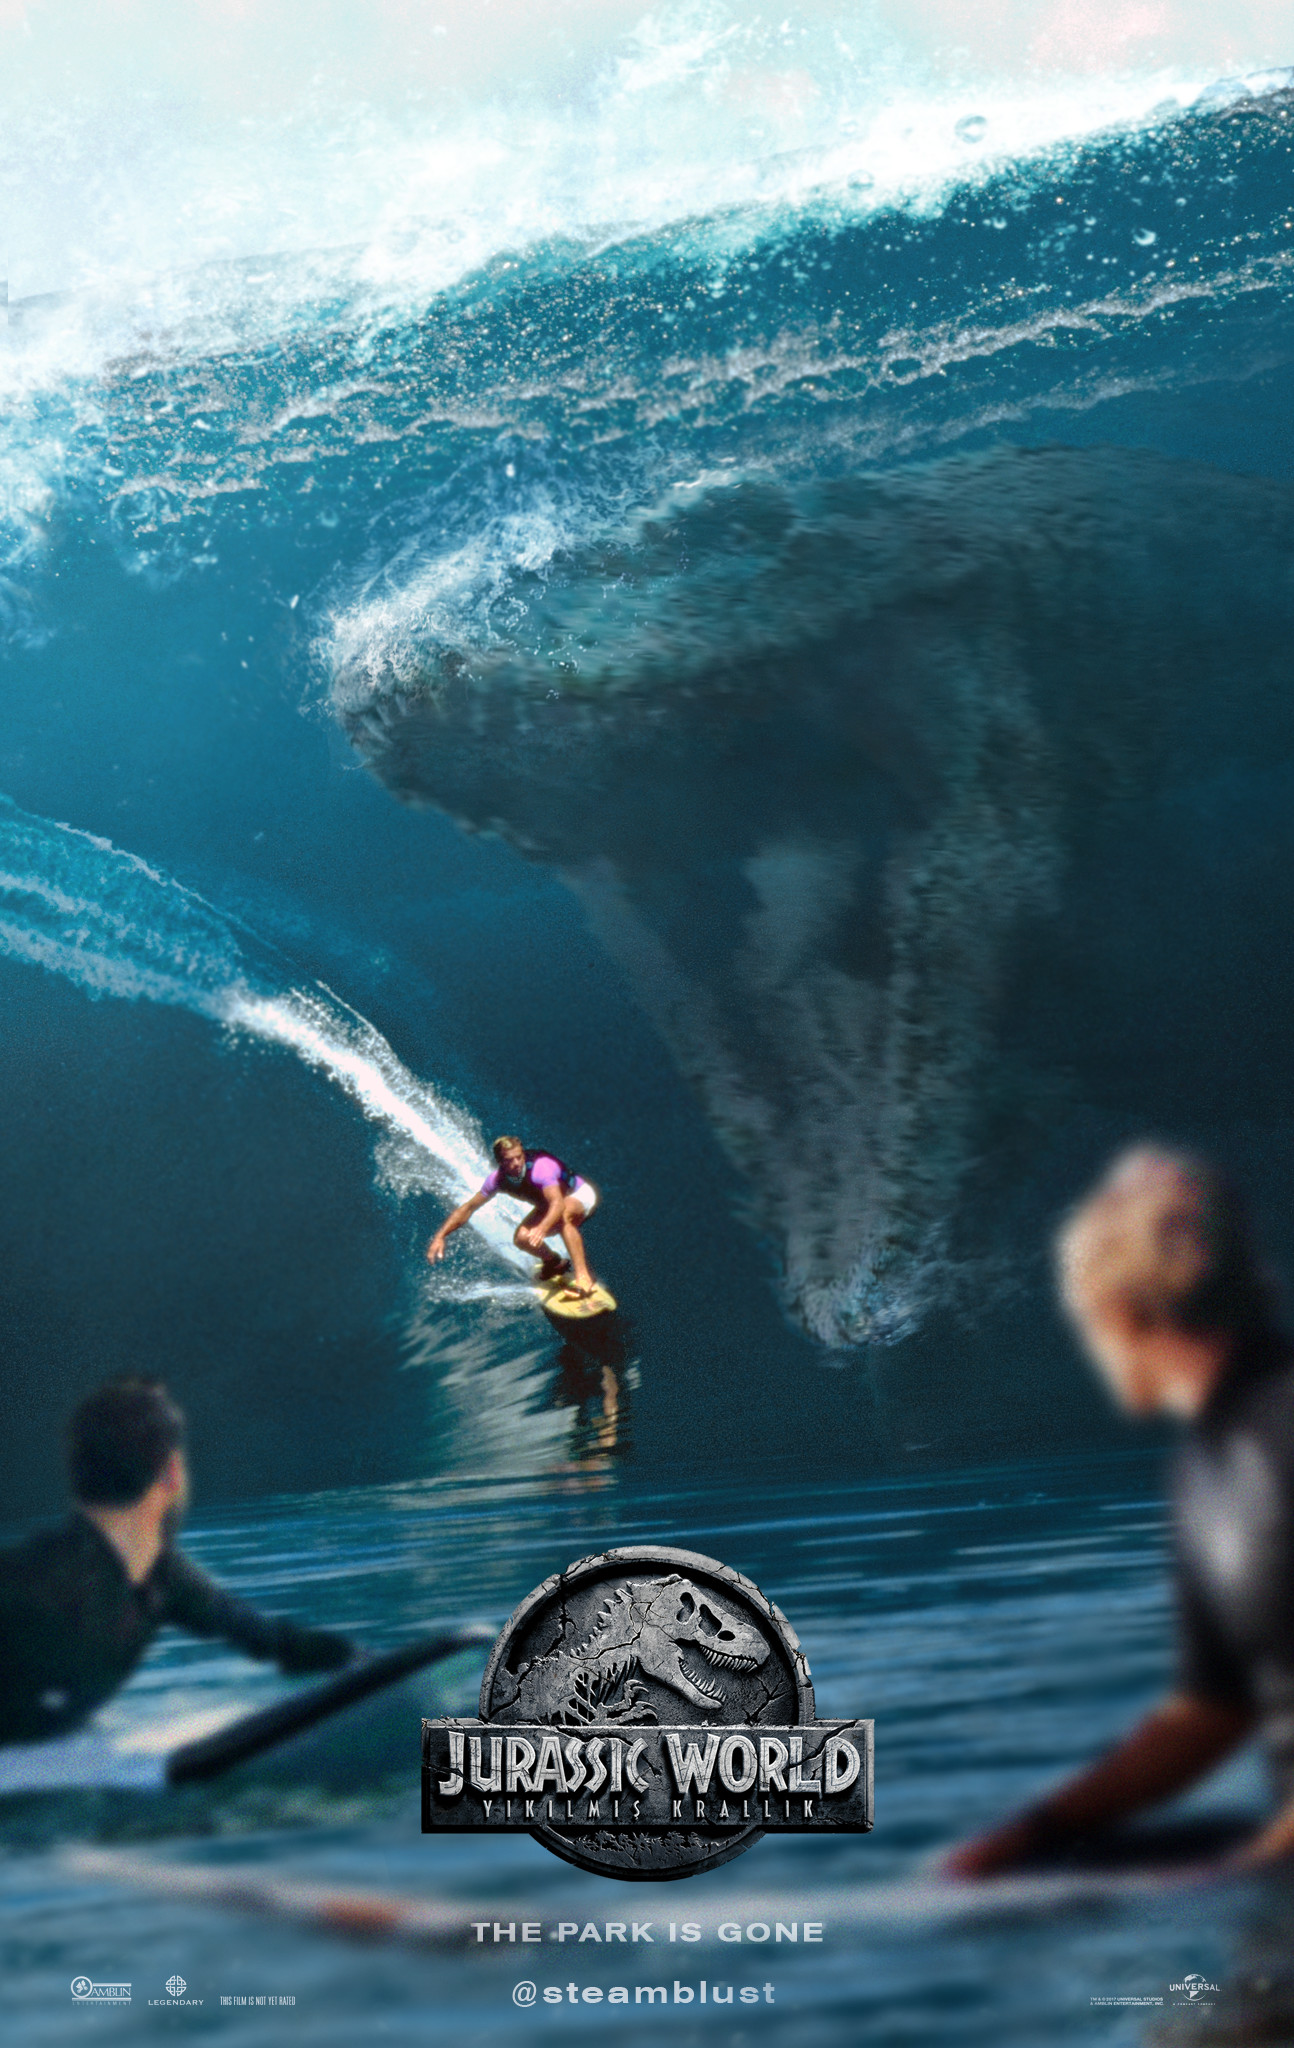 Giant Mosasaurus Features in Jurassic World Poster